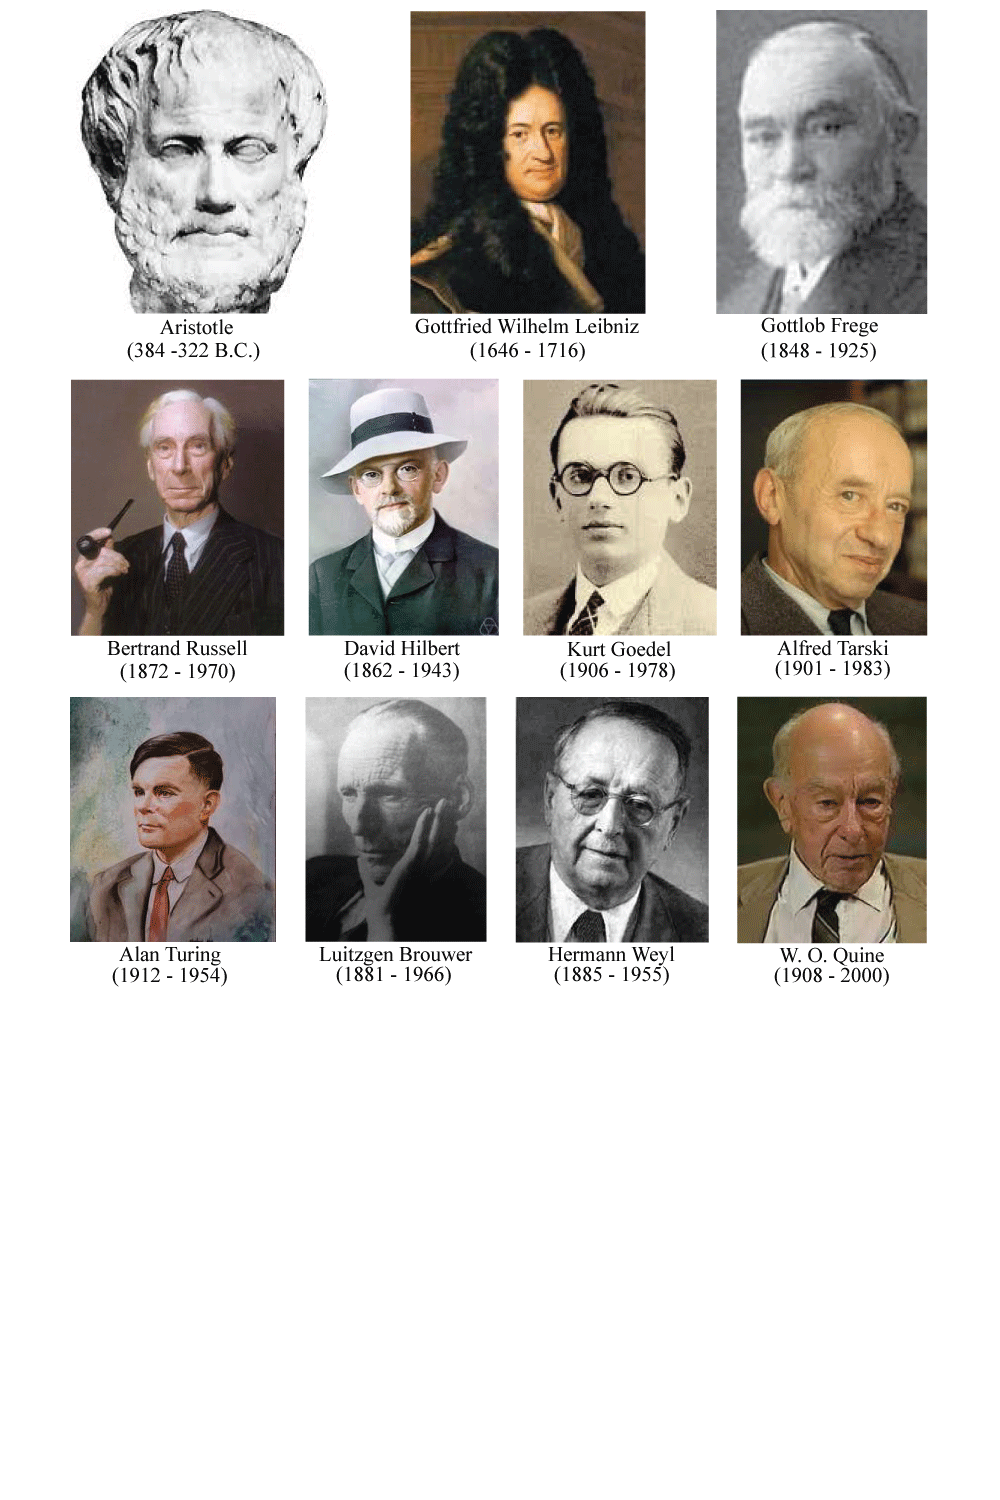 photos of logicians, mathematicians and philosophers